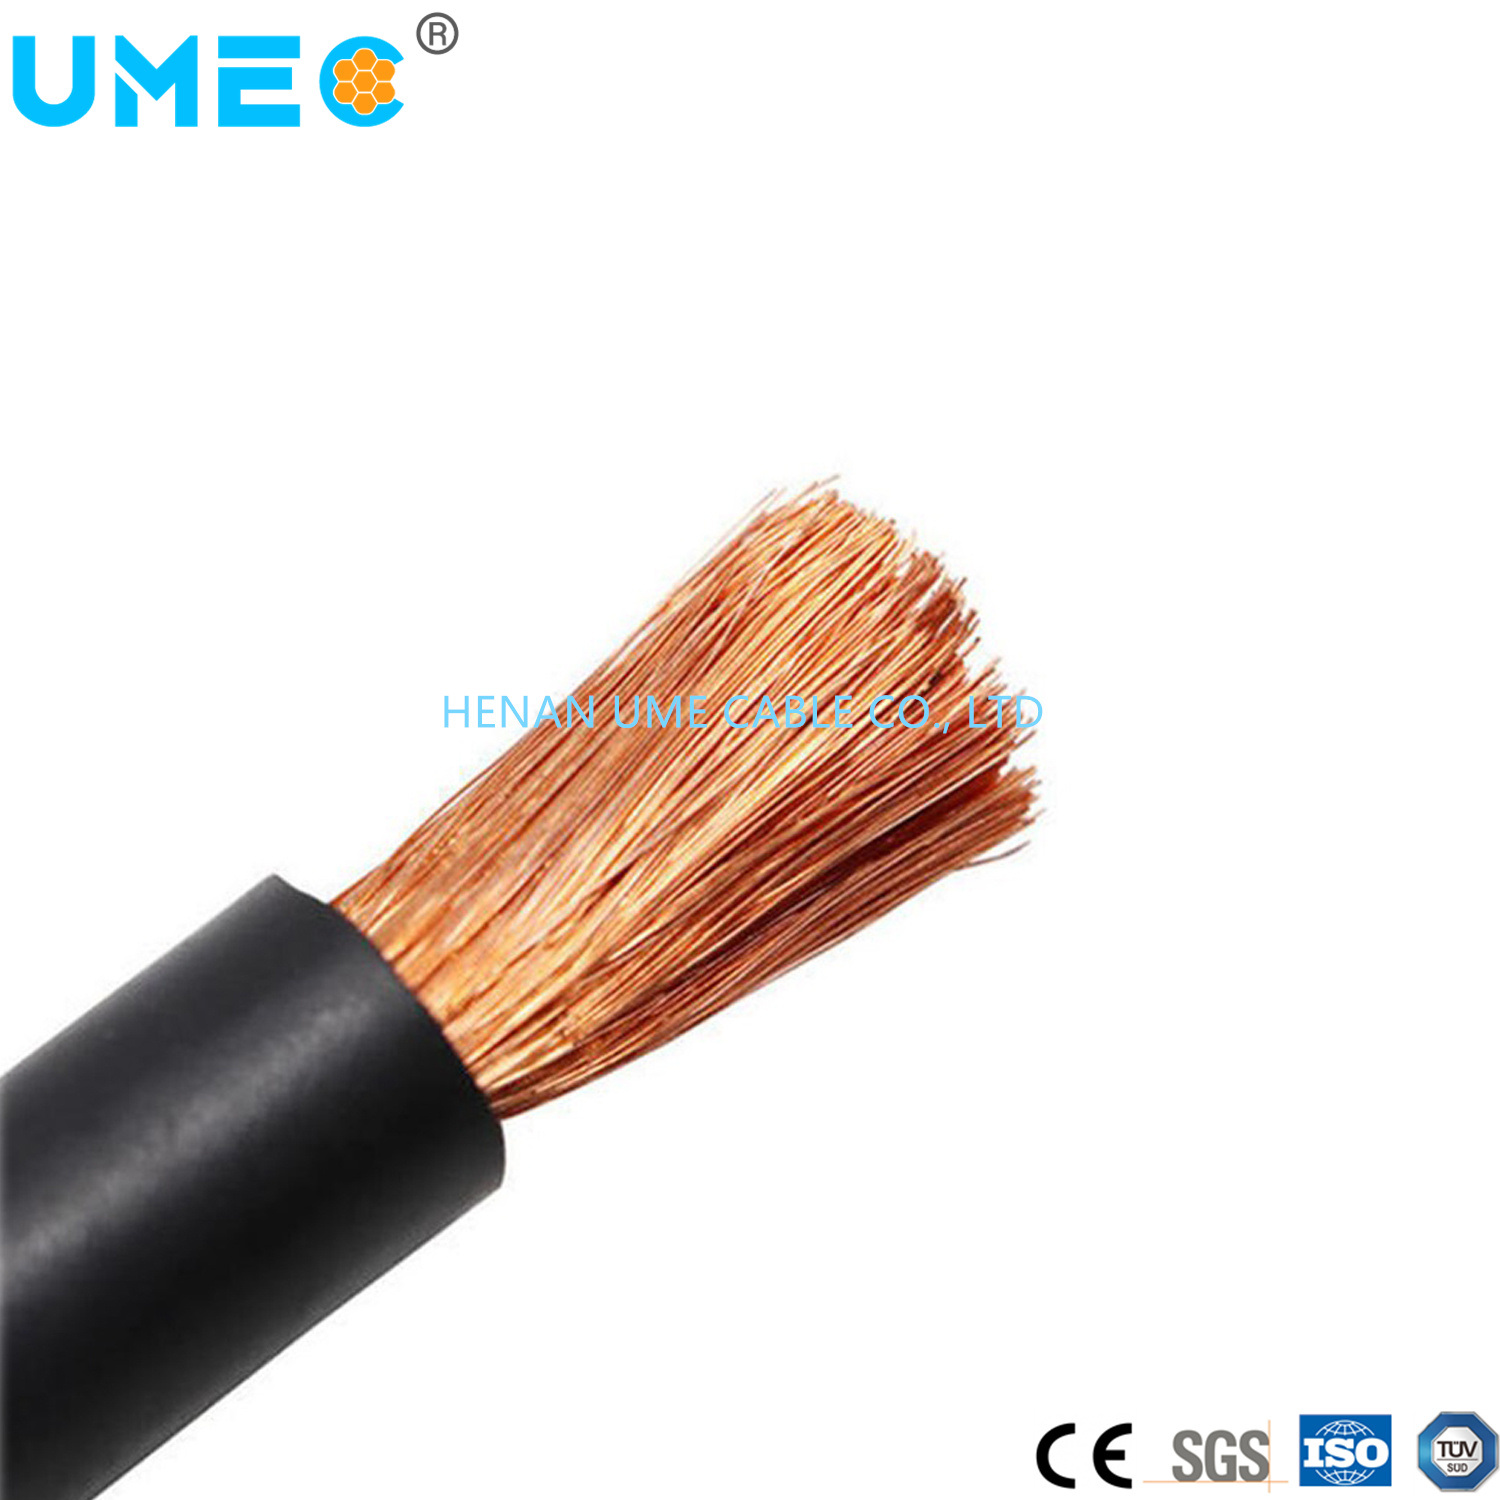 Complex Stranded Silicone Cable for New Energy Car and Safe Equipment Jg 0.6/1kv 16mm2 35mm2 50mm2 70mm2 95mm2